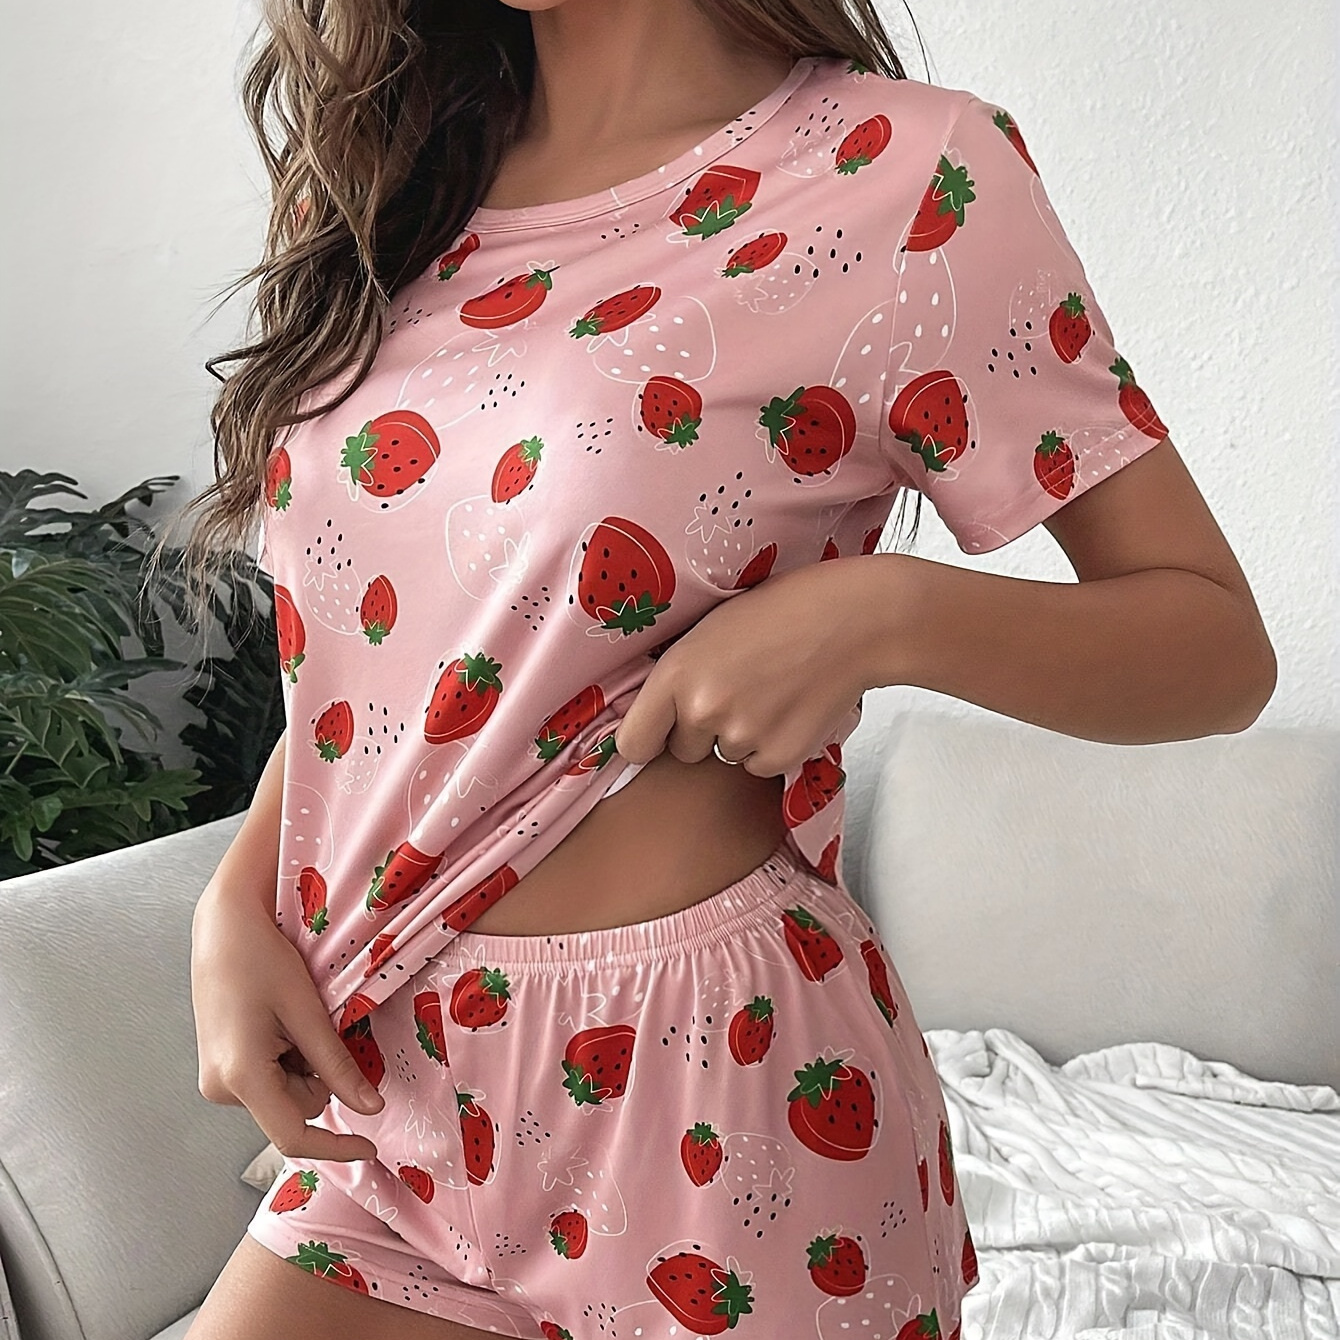 

Women's Cute Strawberry Print Pajama Set, Short Sleeve Round Neck Top & Shorts, Comfortable Relaxed Fit